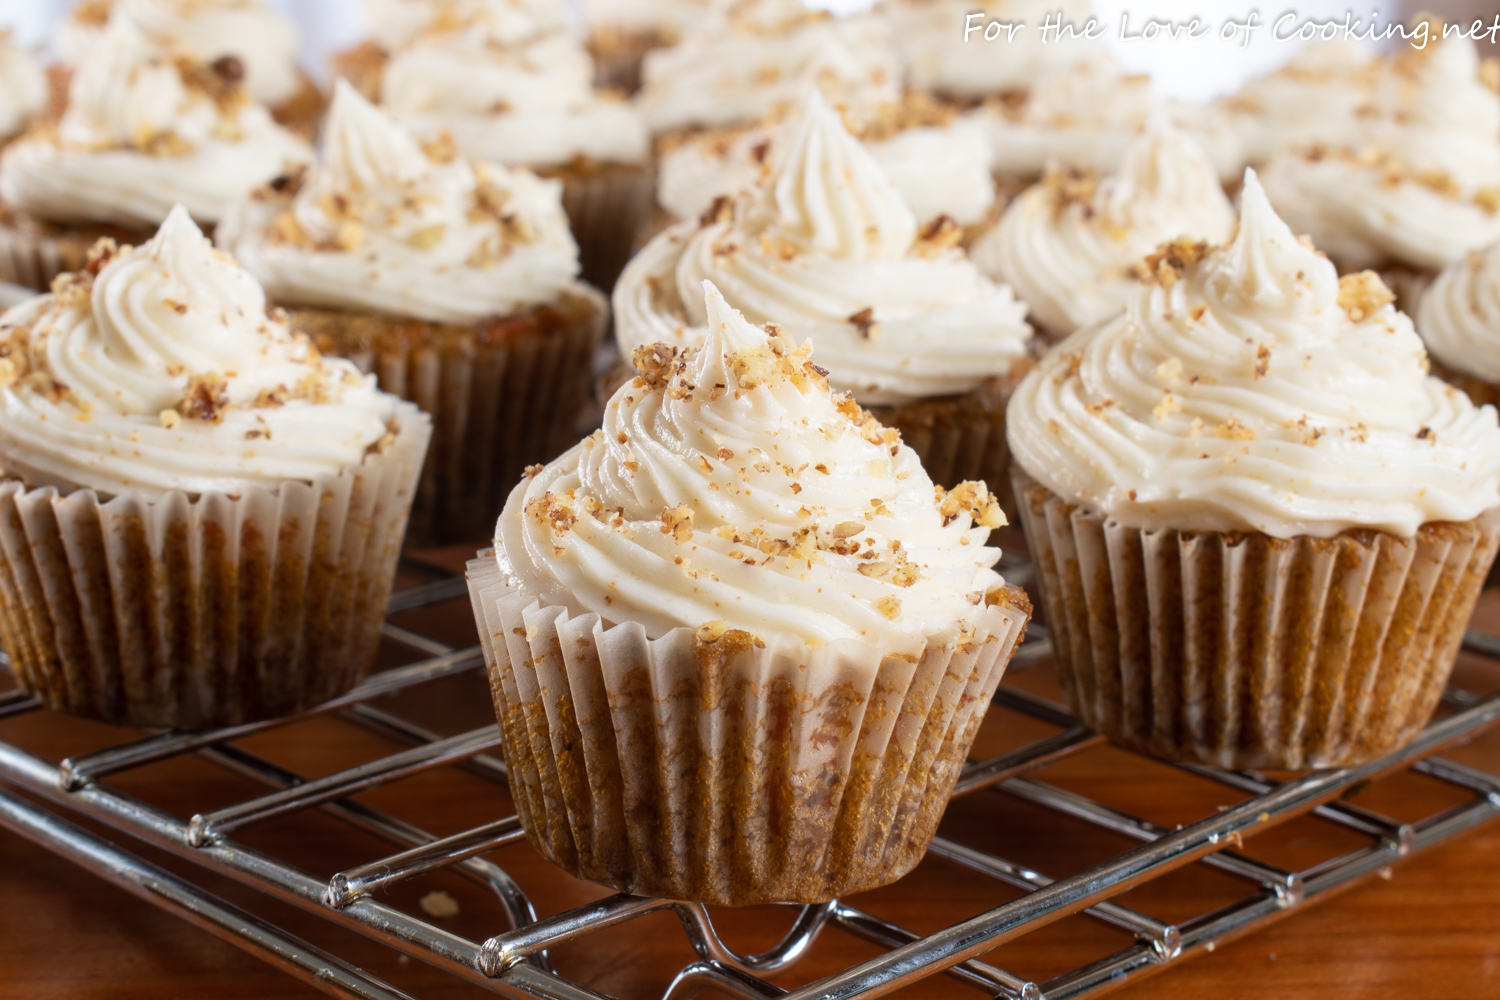 Mini Carrot Cake Cupcakes with Brown Butter Frosting